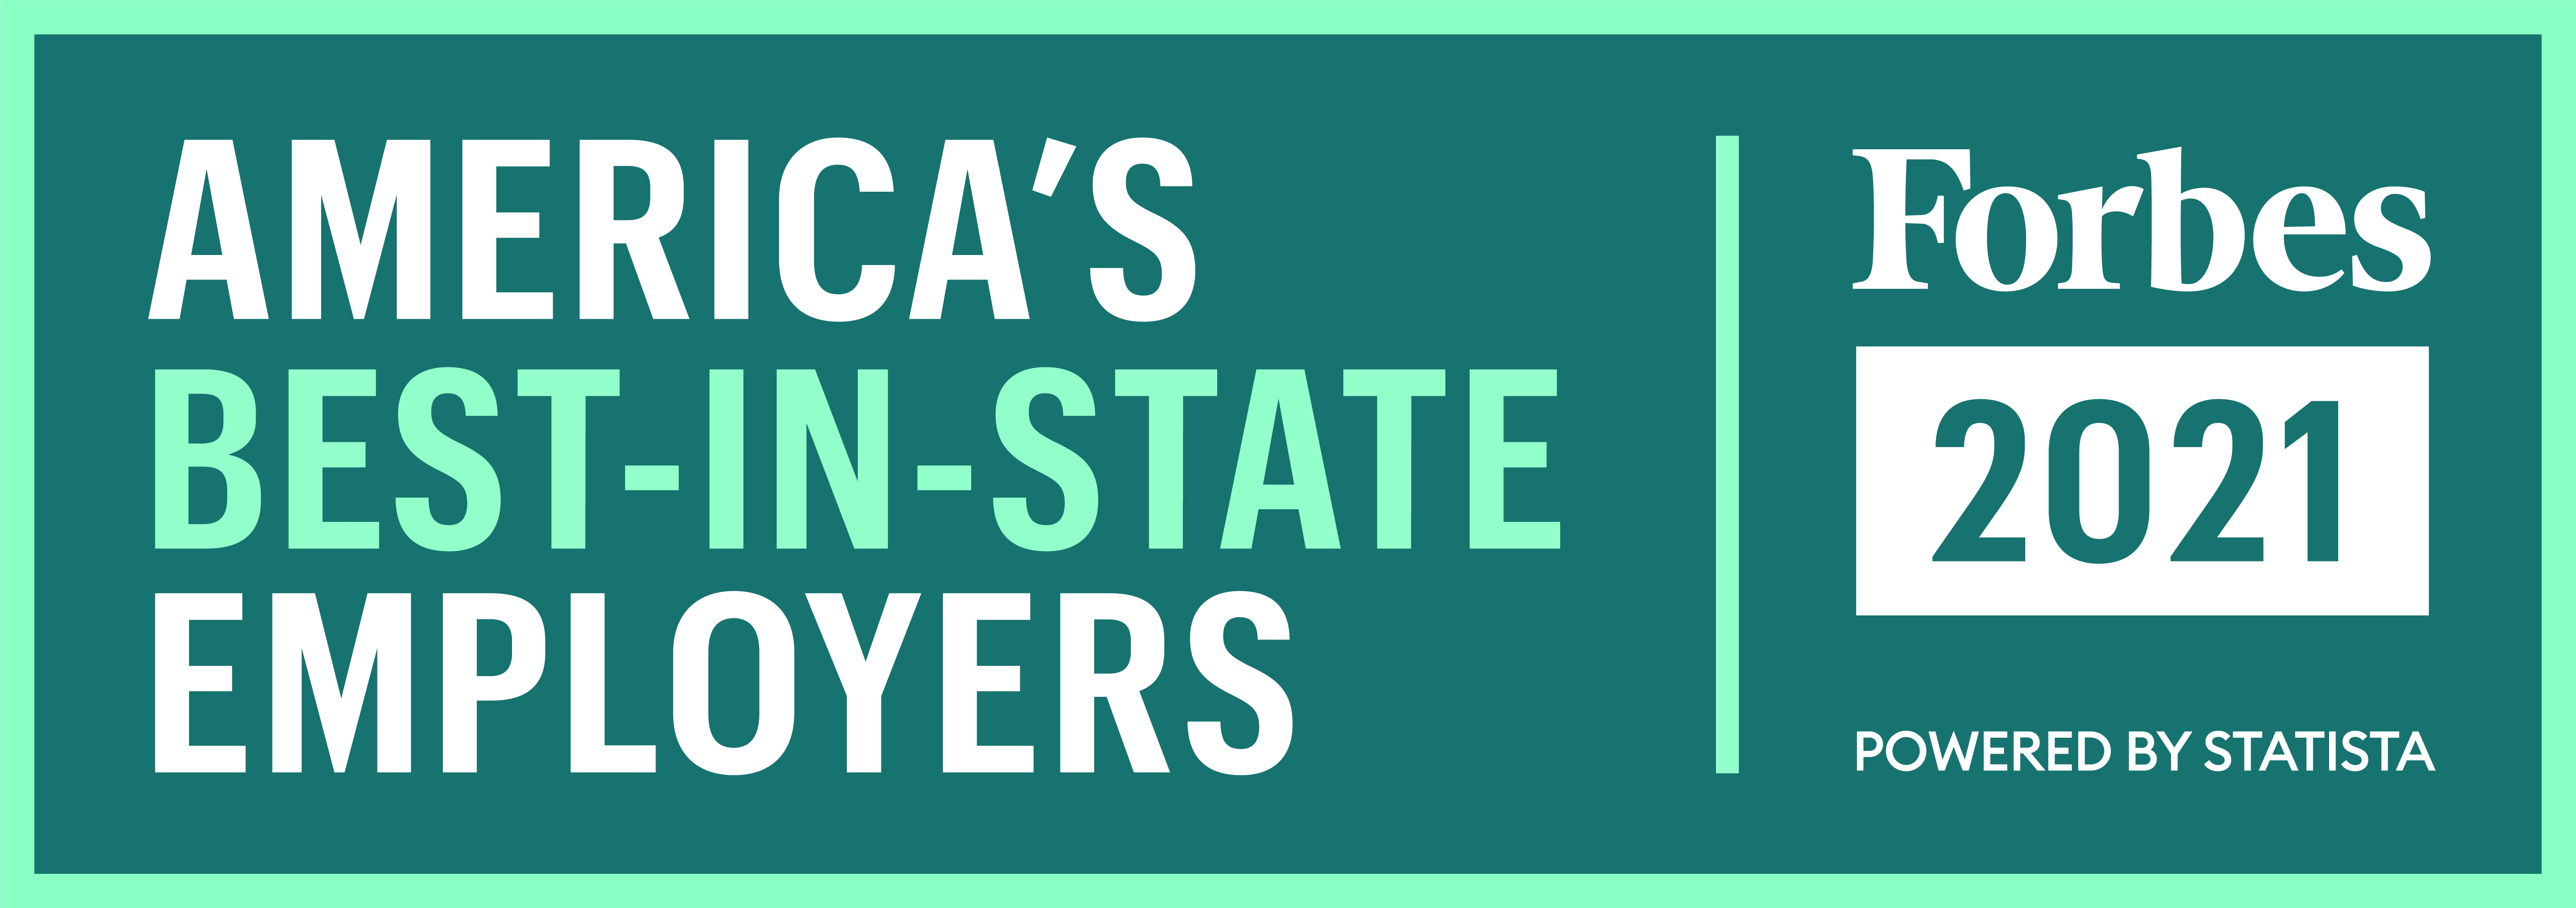 America's Best-in-State Employers Forbes 2021 Powered by Statista